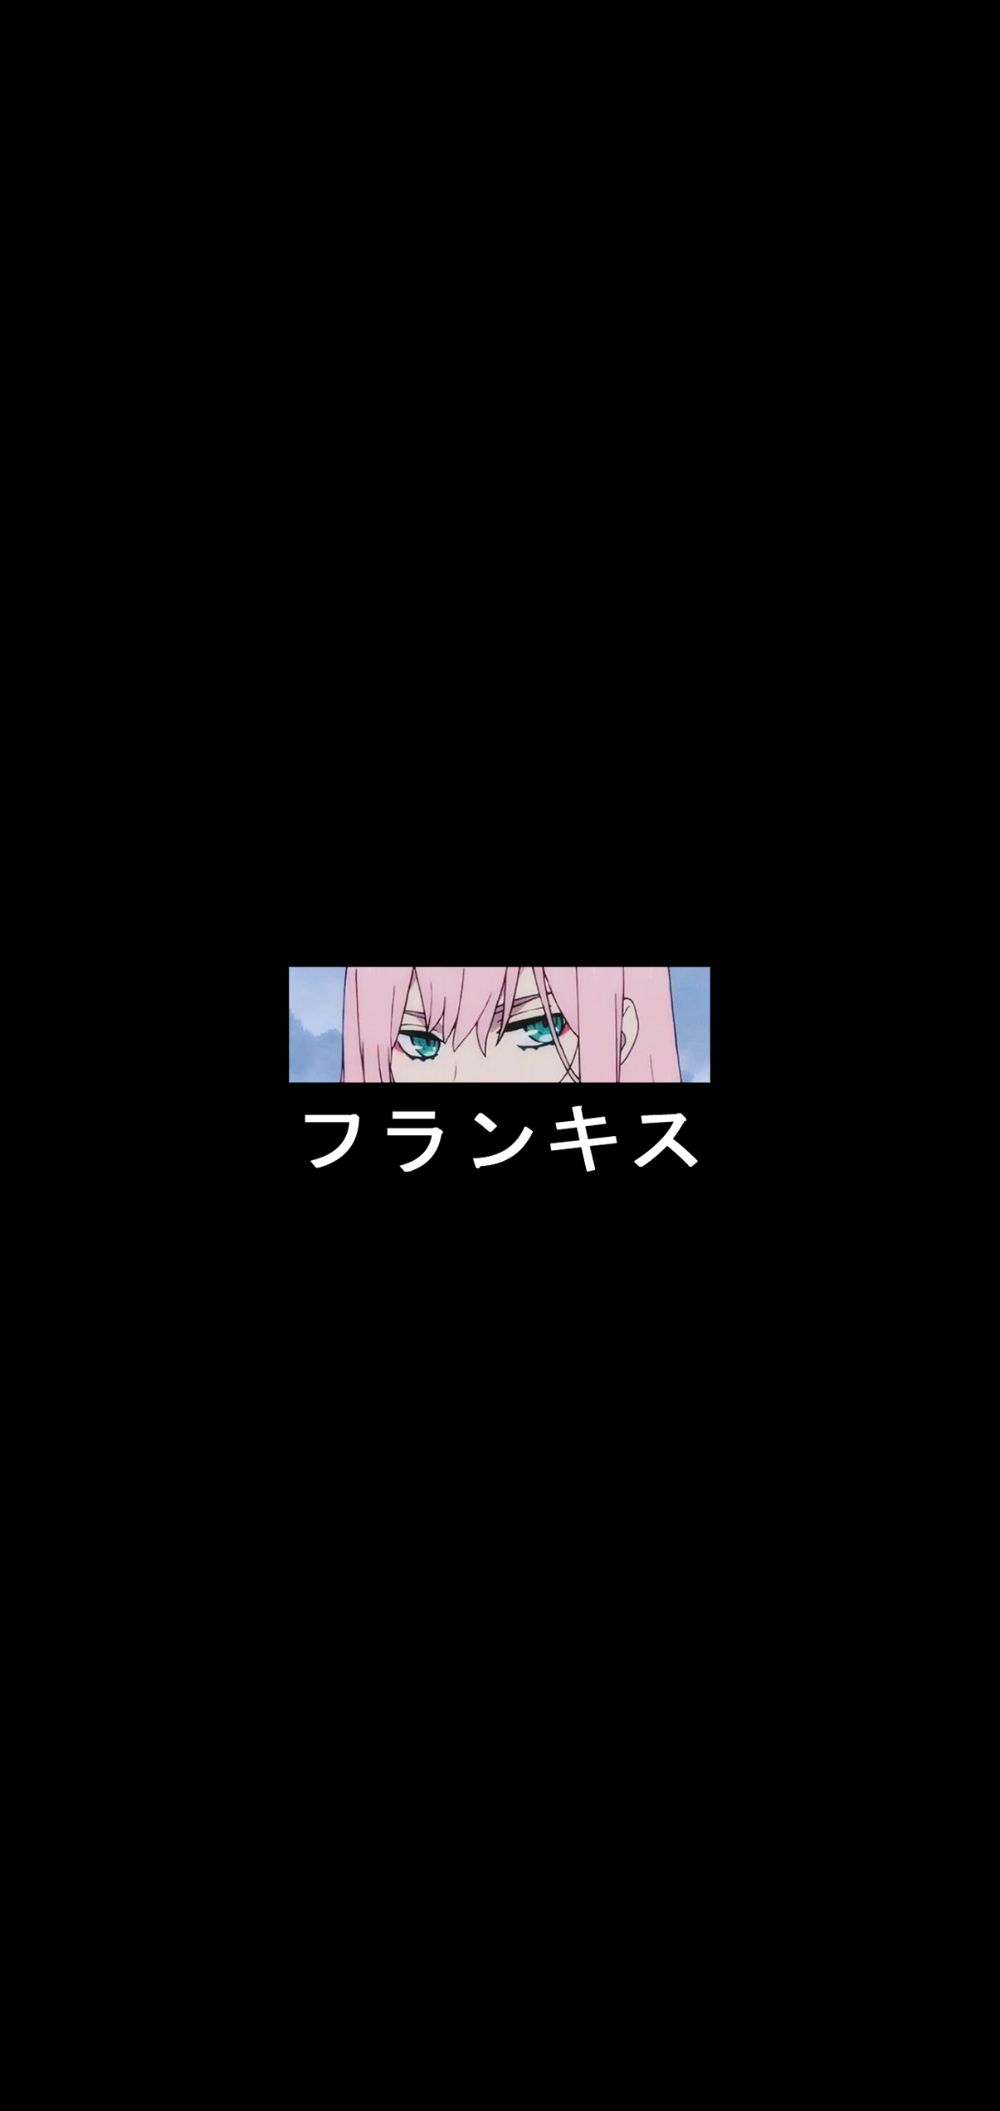 Anime wallpaper Two (Darling in the FranXX). Anime wallpaper, Zero two, Darling in the franxx